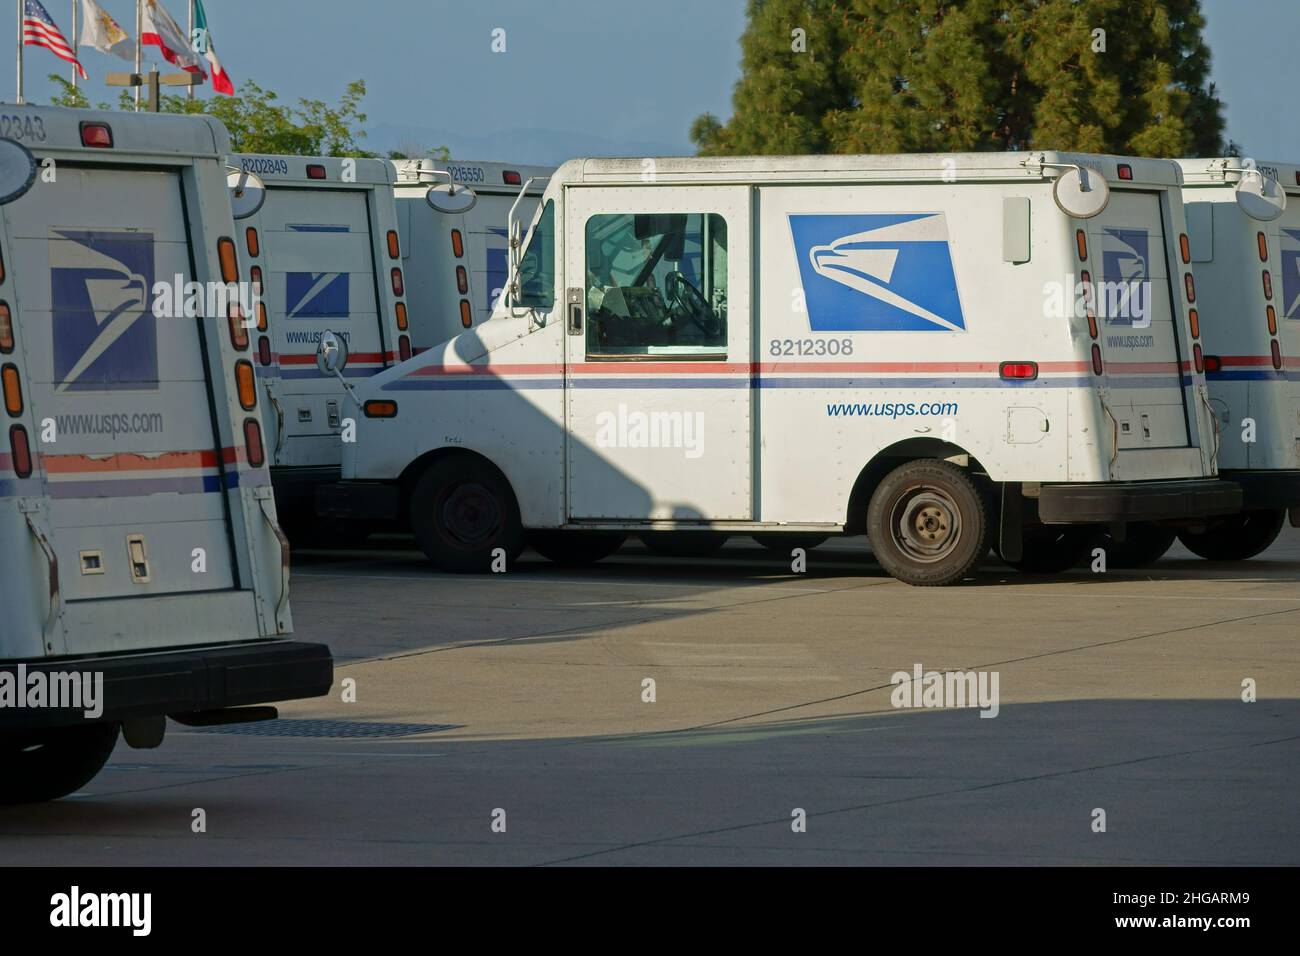 Monterey, CA / USA - April 3, 2021: Grumman LLV (Long Life Vehicle) mail trucks, operated by the United States Postal Service (USPS), are shown. Stock Photo